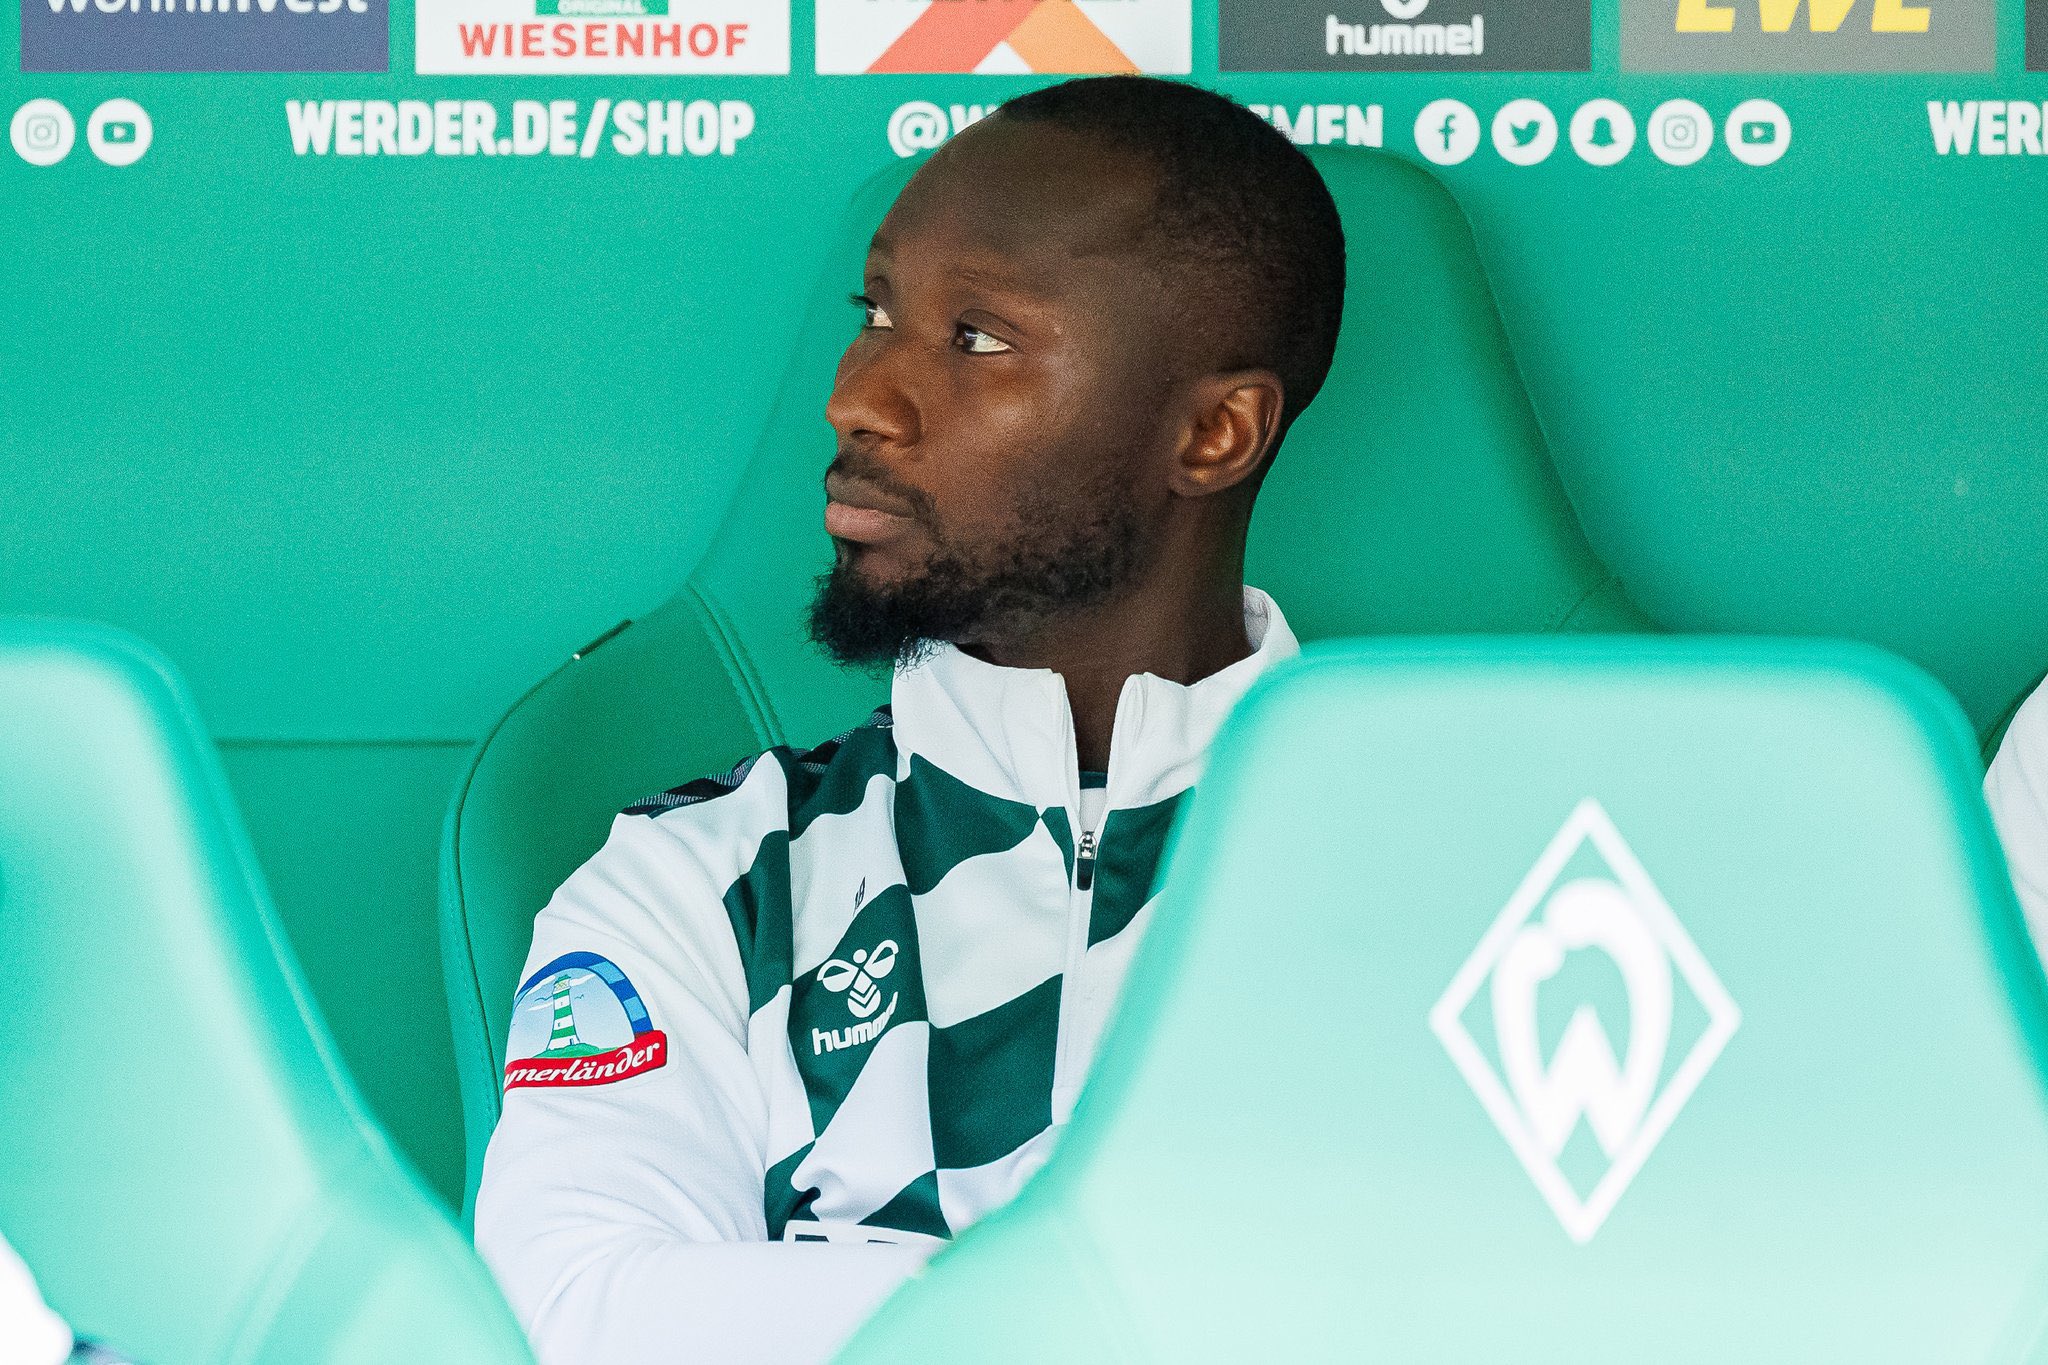 Naby Keïta suspended for dissent by Werder Bremen until end of season